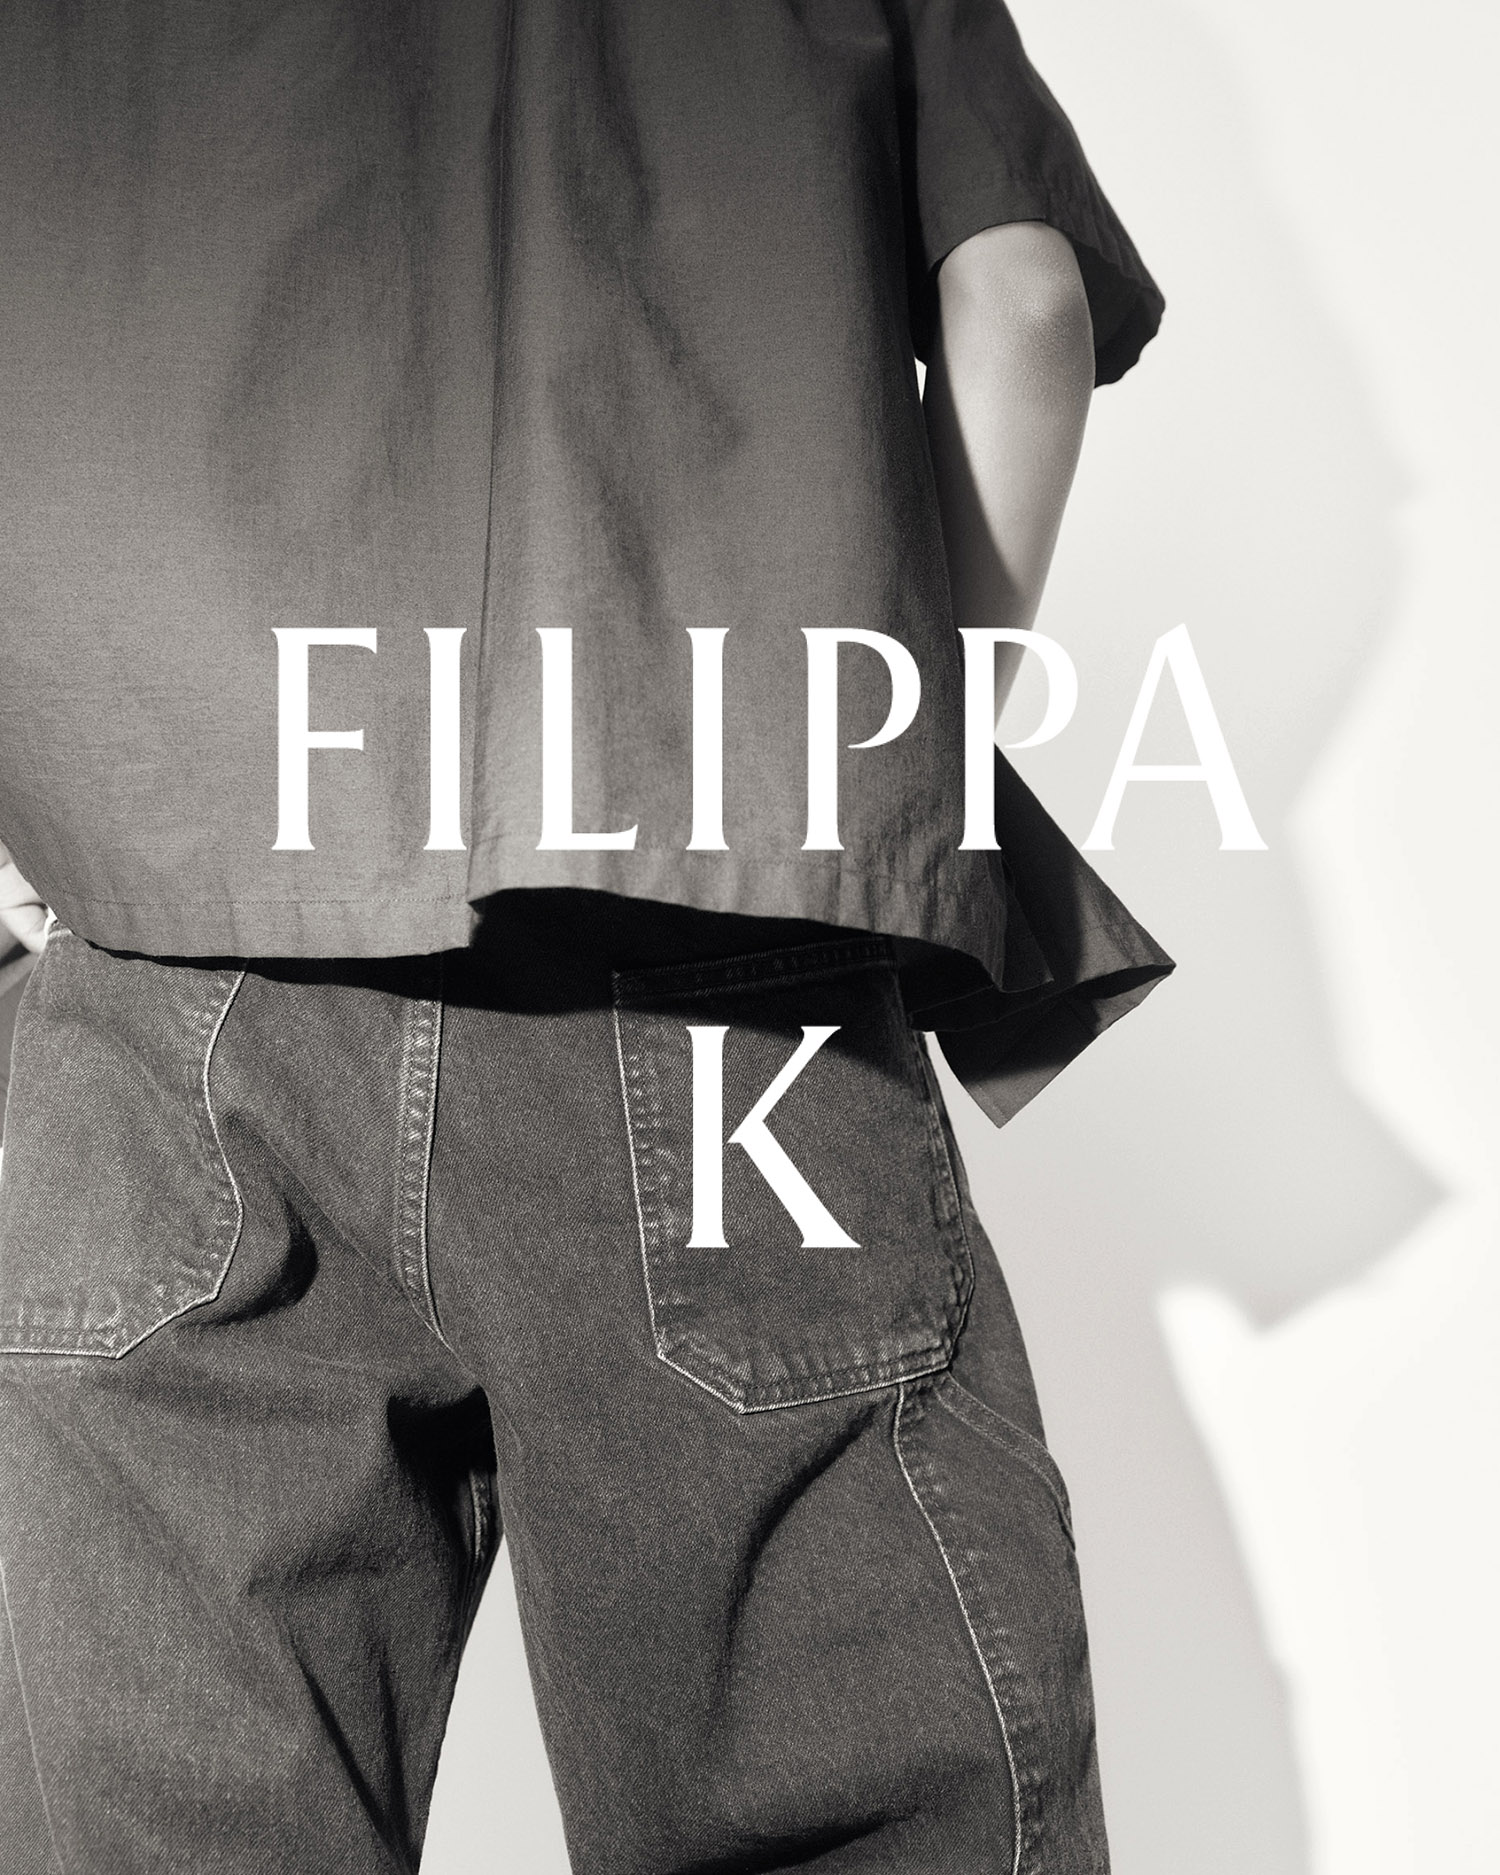 Filippa K SS24 fashion campaign with Matthew Seymour. Shot by Frida-My, styling by Isabelle Thiry.